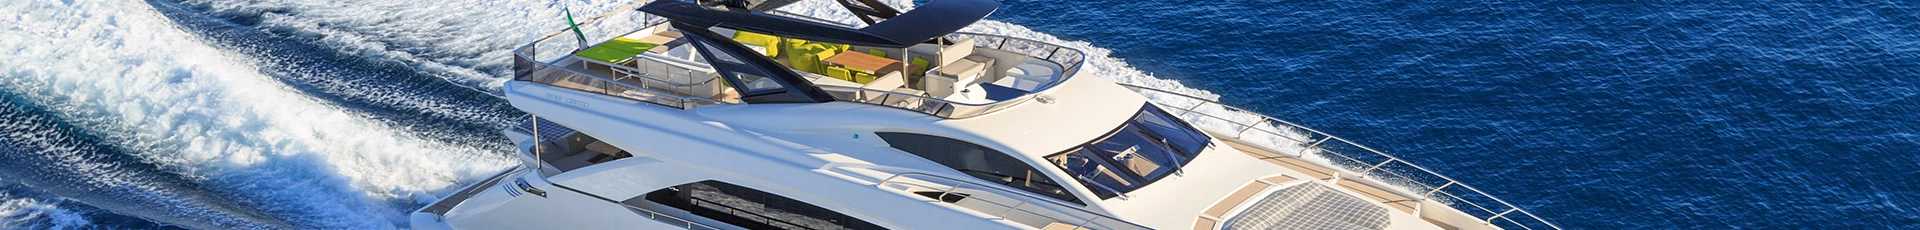 Boat Removal and Disposal Services in: Flybridge Yachts